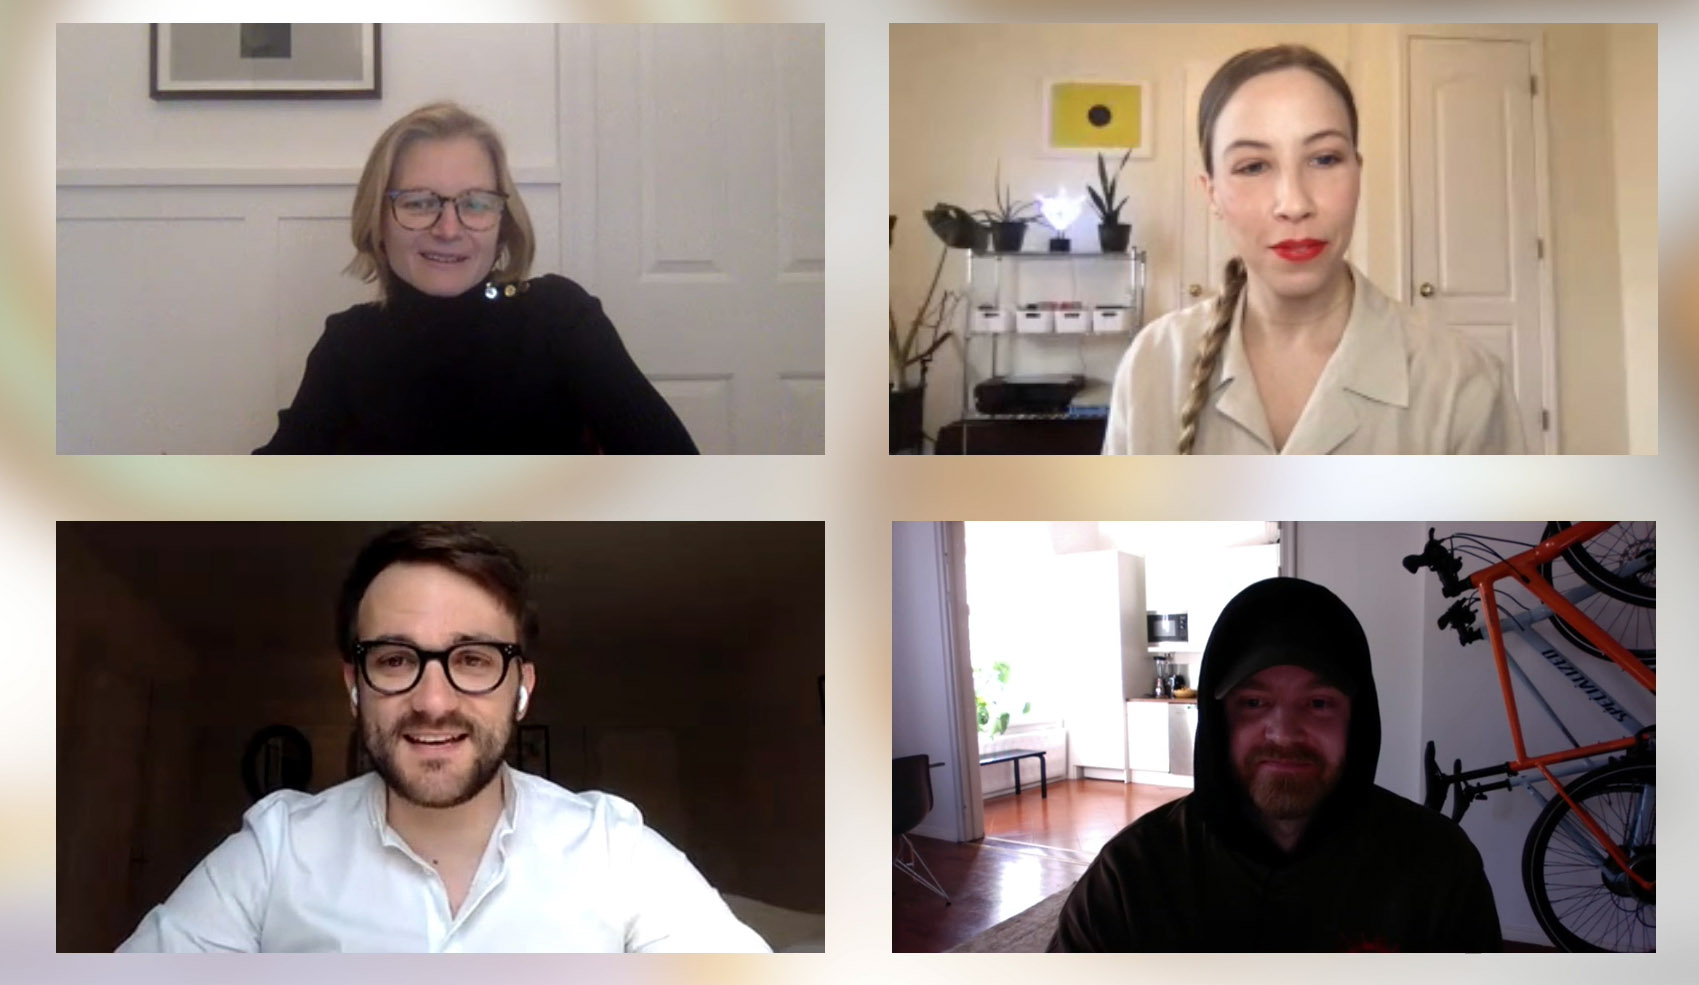 Pictured during the webinar discussion are (clockwise from top left): Caroline Brown, managing director of Closed Loop Partners, Rachel Kibbe, CEO of Circular Services Group, fashion designer Rolf Ekroth, Francois Souchet of The Ellen MacArthur Foundation. 